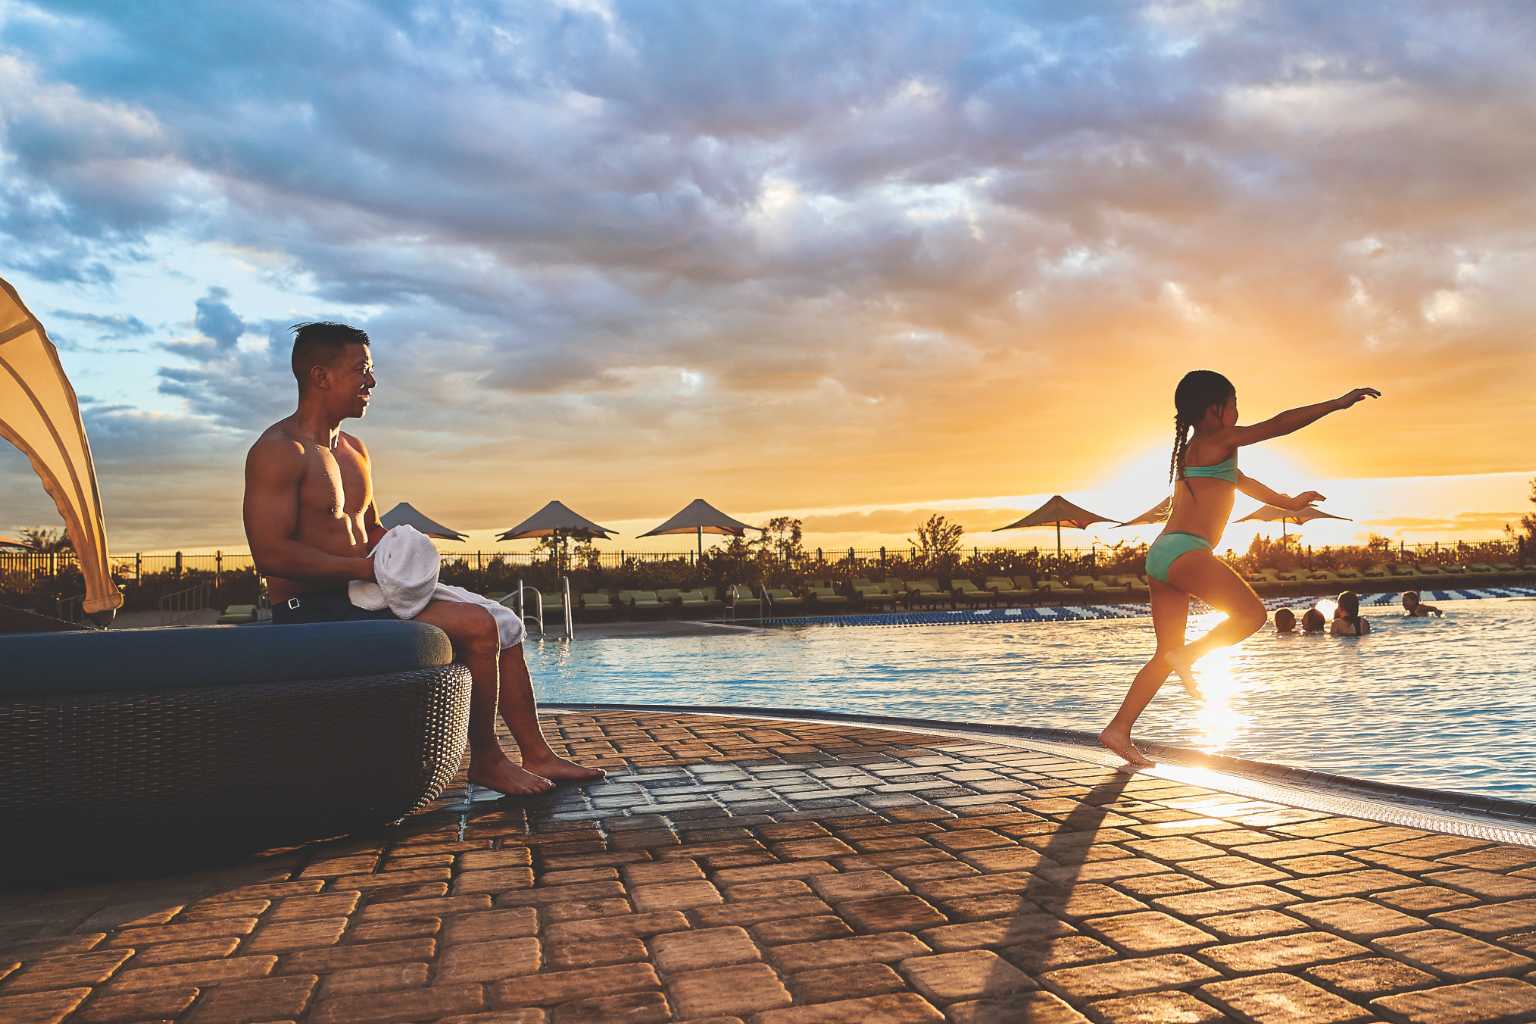 Girl jumping into a pool at sunset with her dad in a lounge chair behind her.